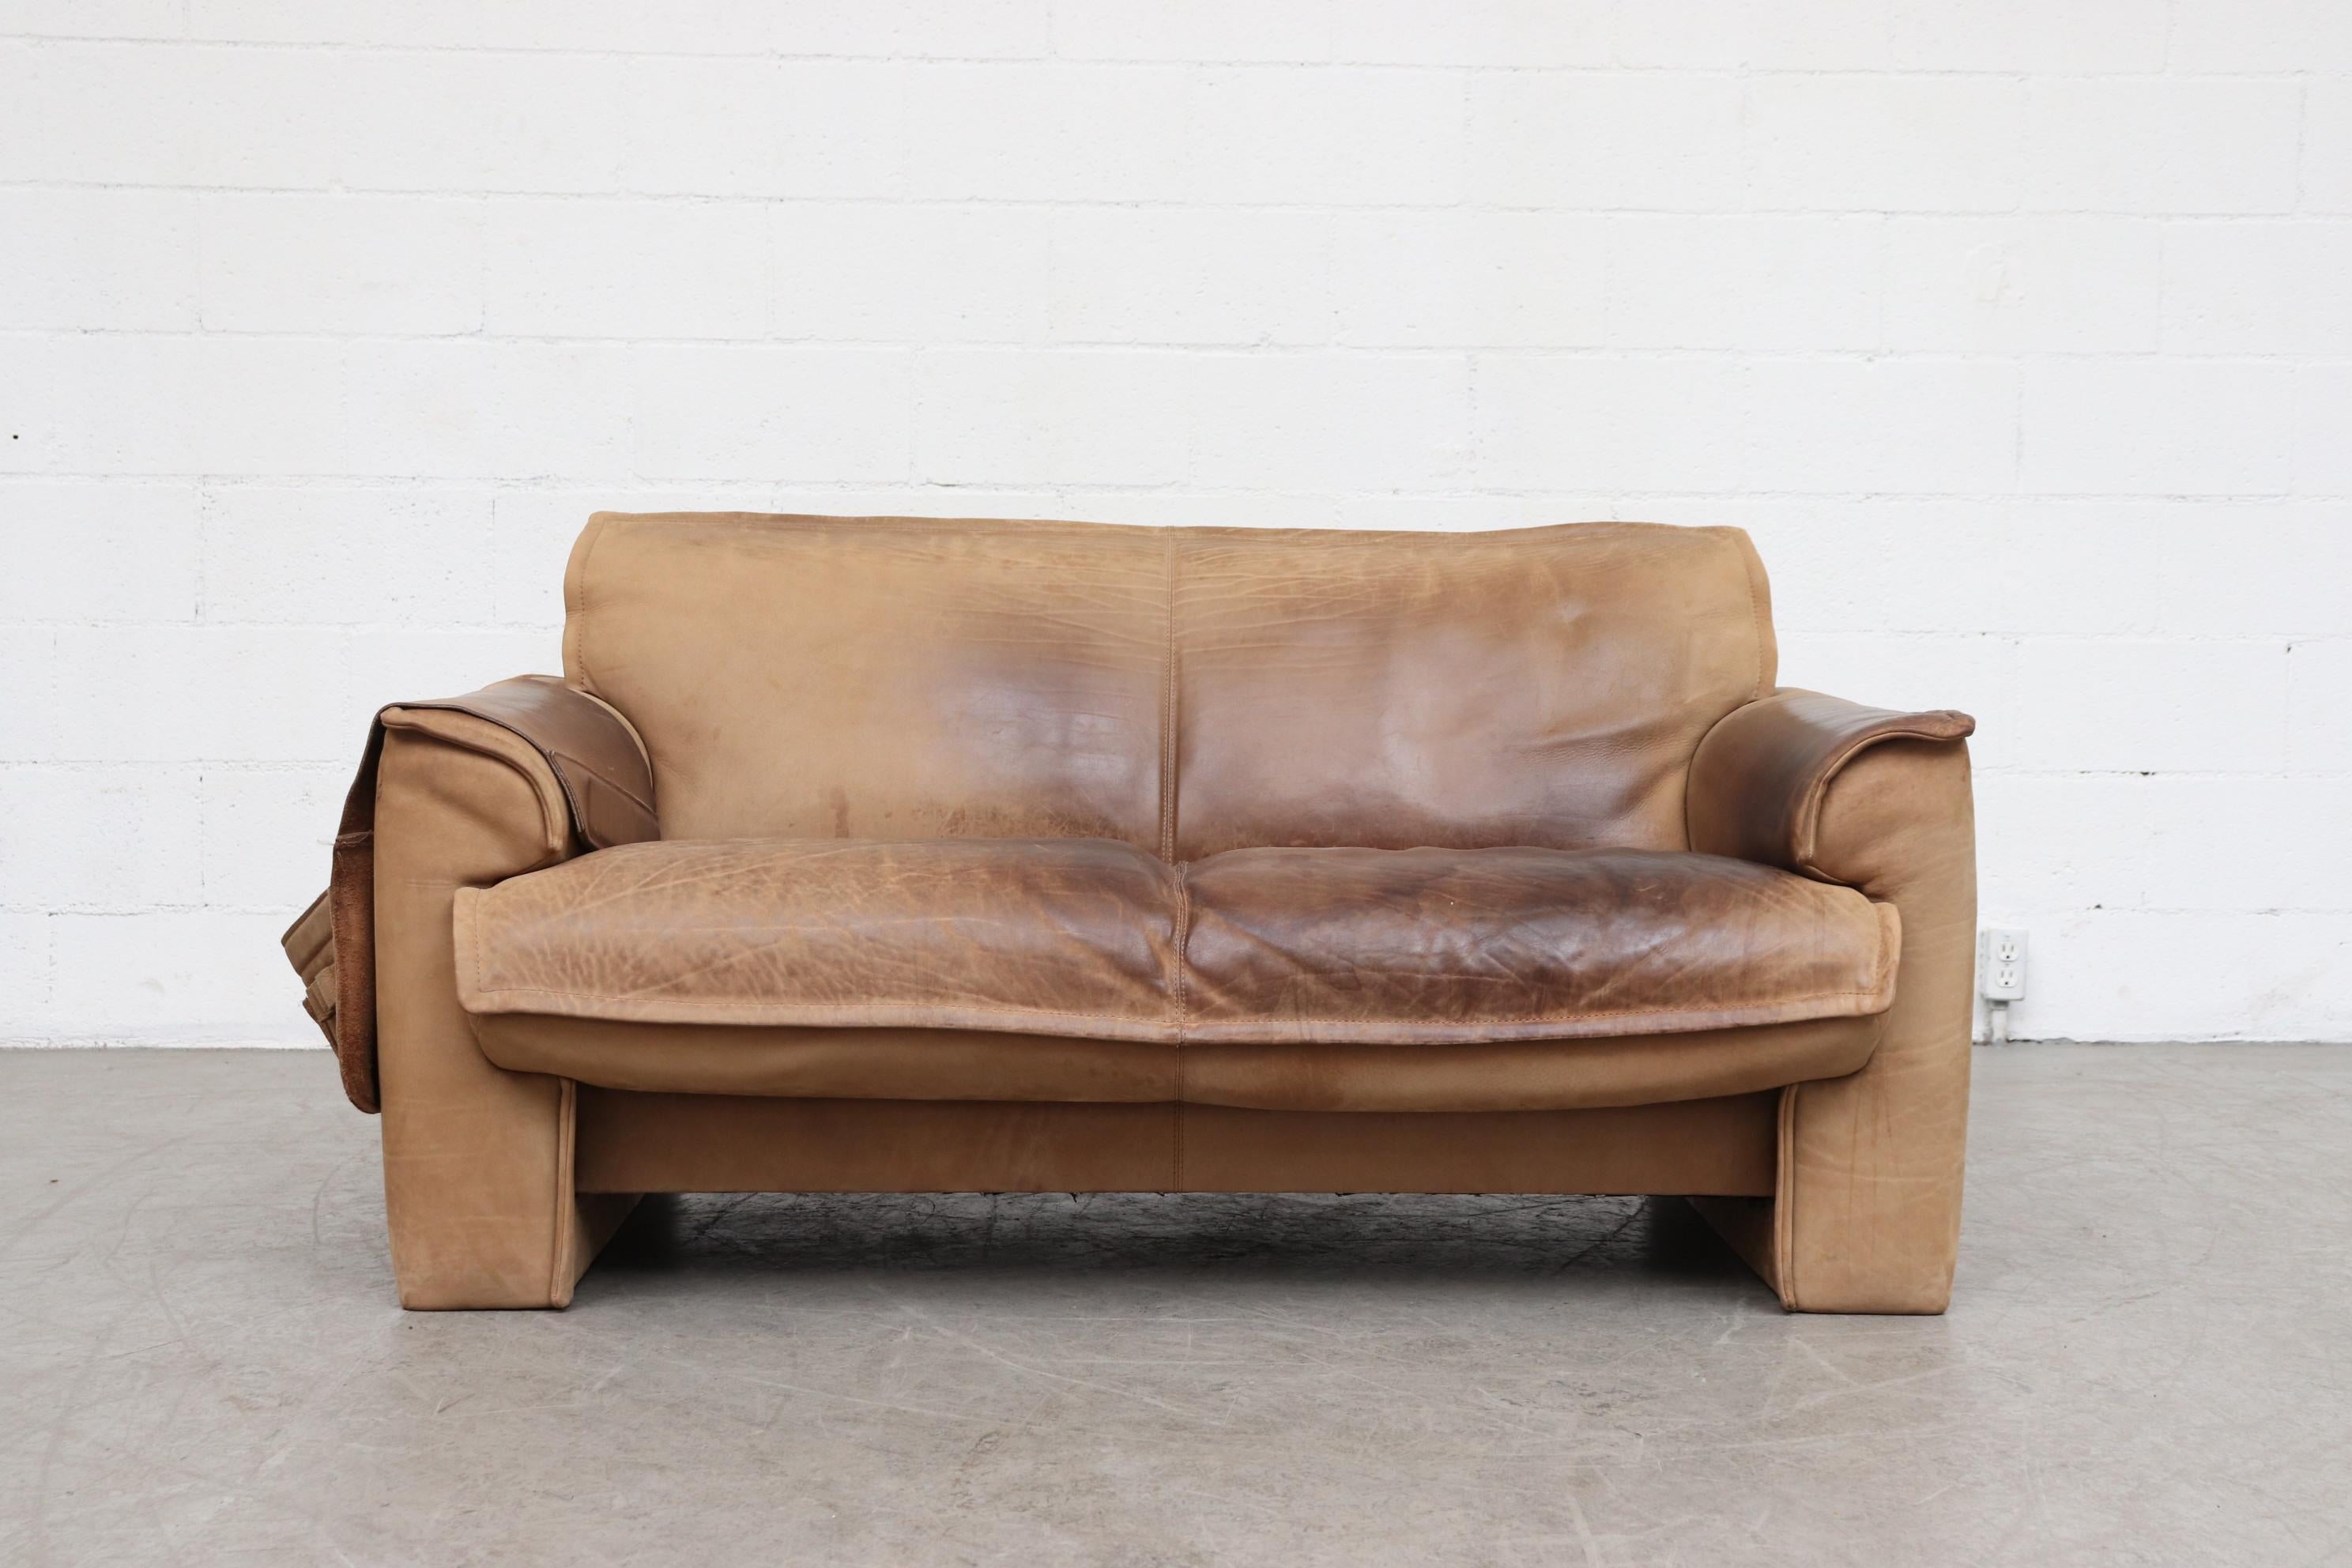 Leolux Buffalo leather loveseat sofa in very original condition with heavy patina and visible signs of wear. Comes with super cool weighted and removable side saddle pouch for storage (books, magazines, remotes, etc.). Center seam is split a little